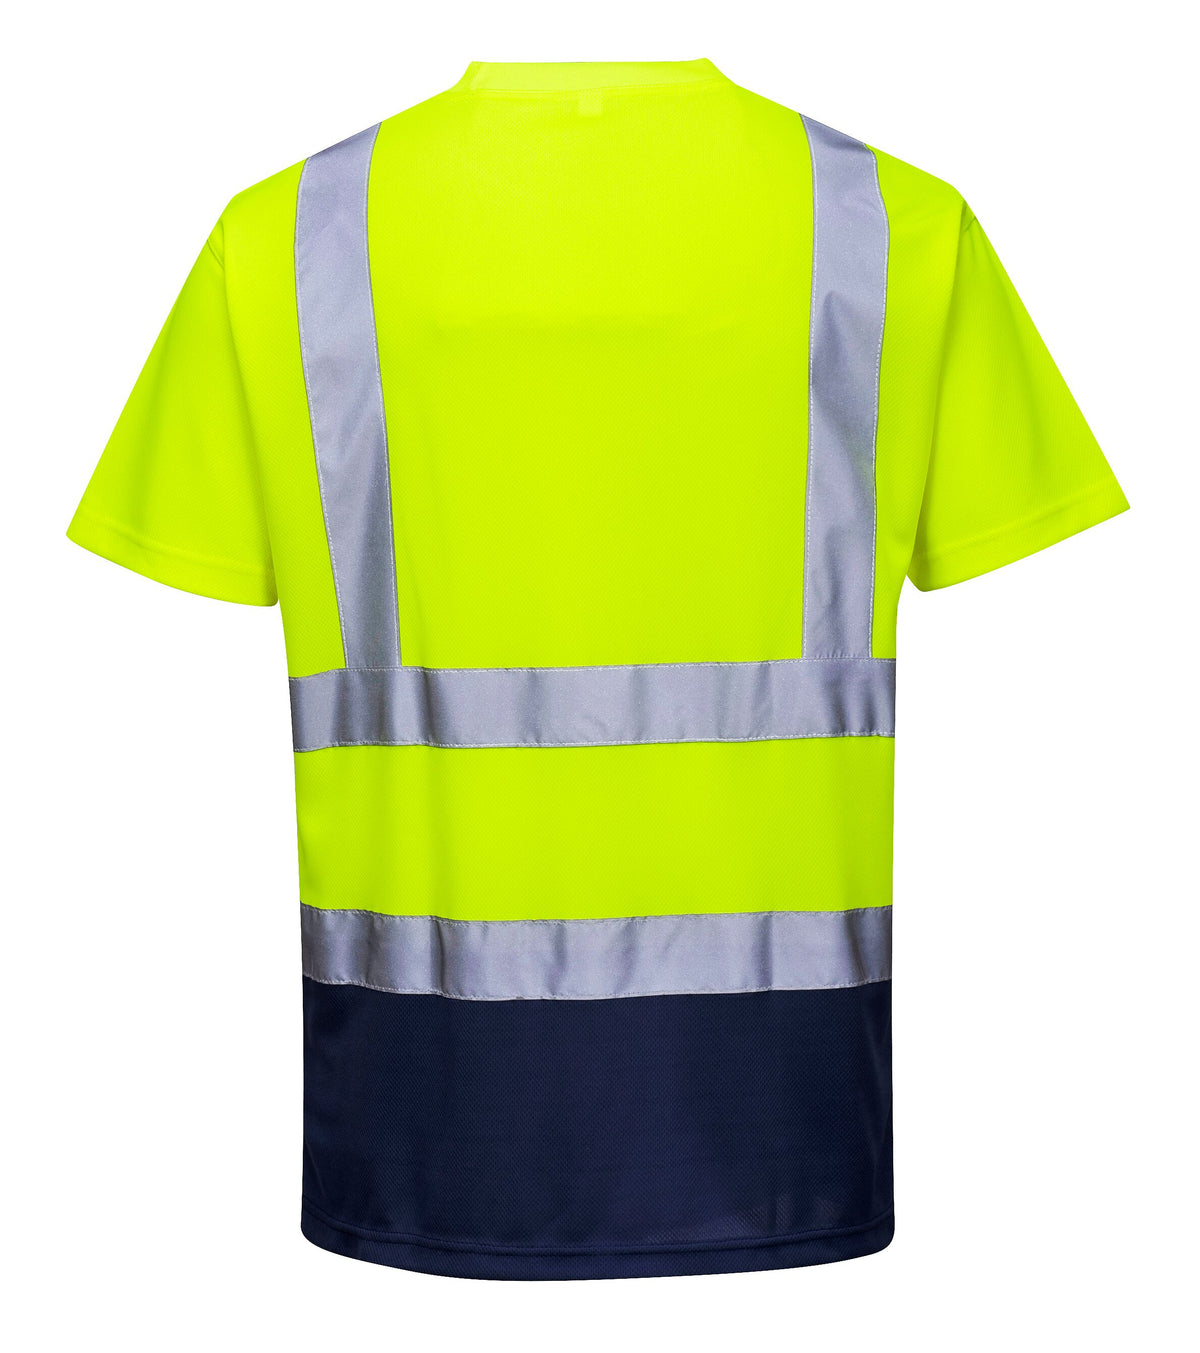 Two Tone High Visibility Shirts -  Reflective Shirt for Men and Women Hi Vis Work Clothes